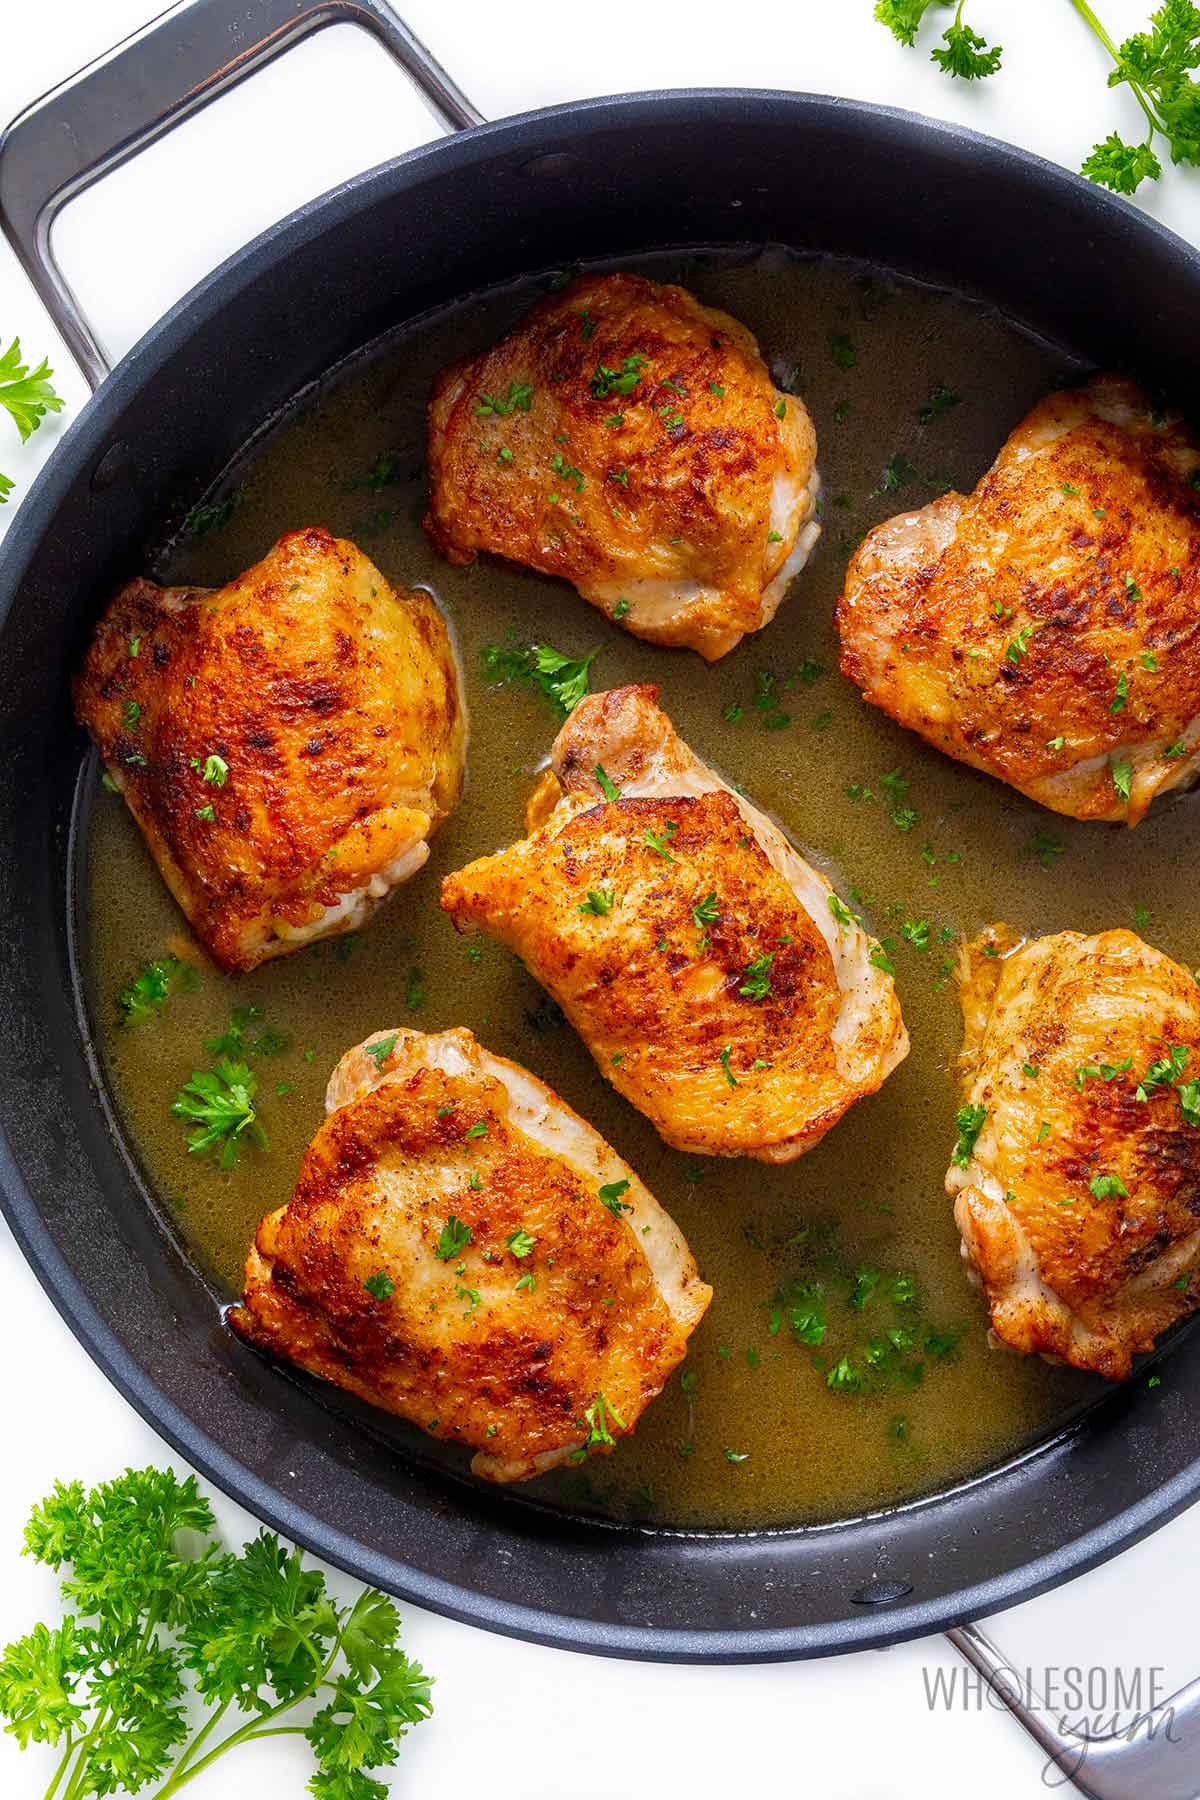 Frying chicken thighs in a pan.